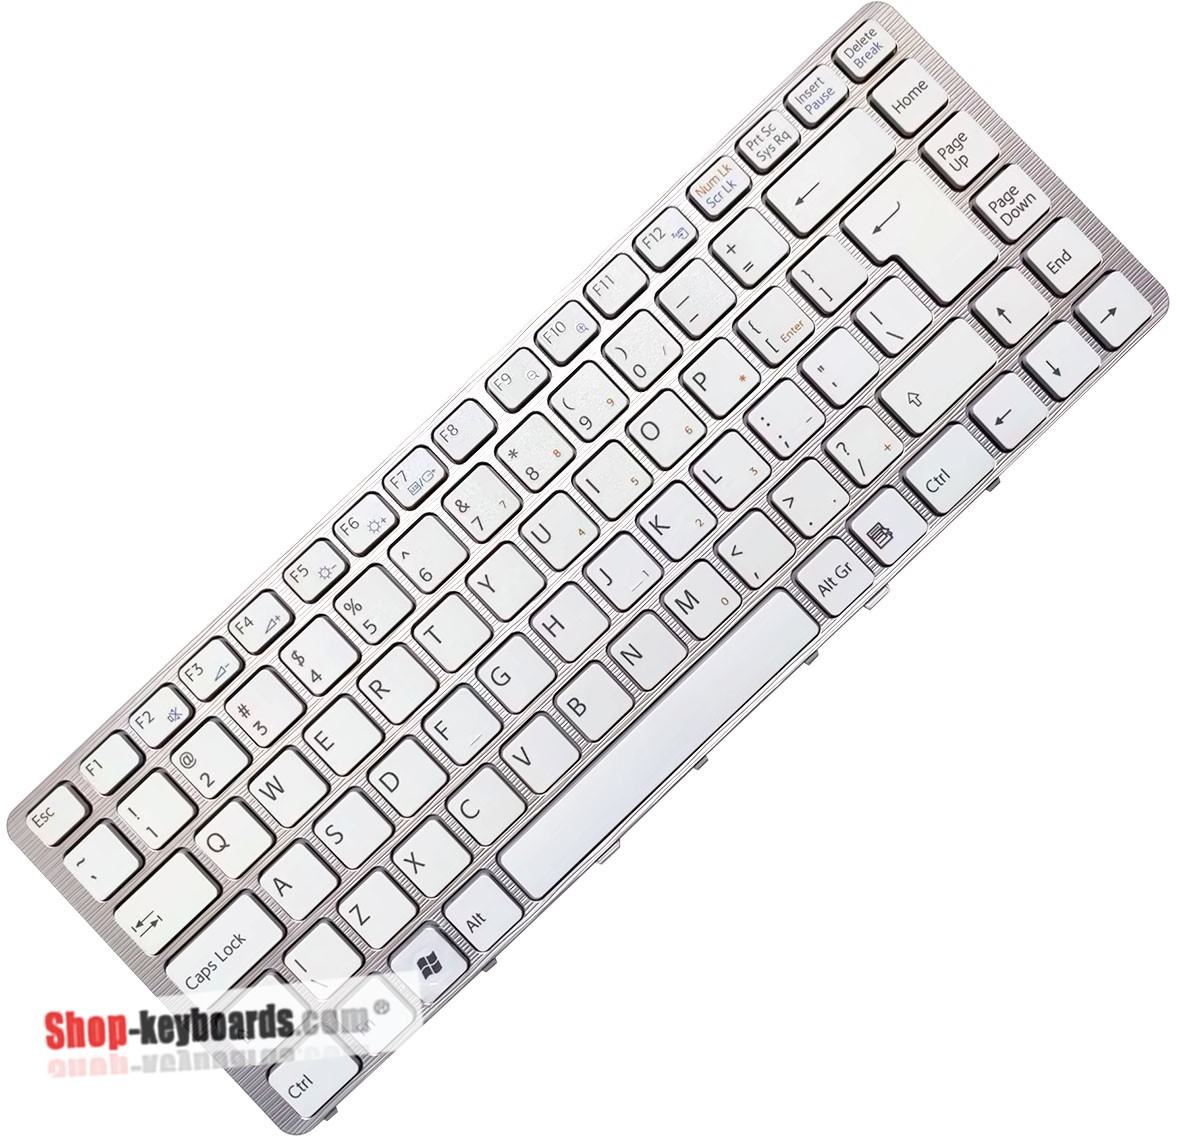 Sony VAIO VGN-NW125J/T Keyboard replacement